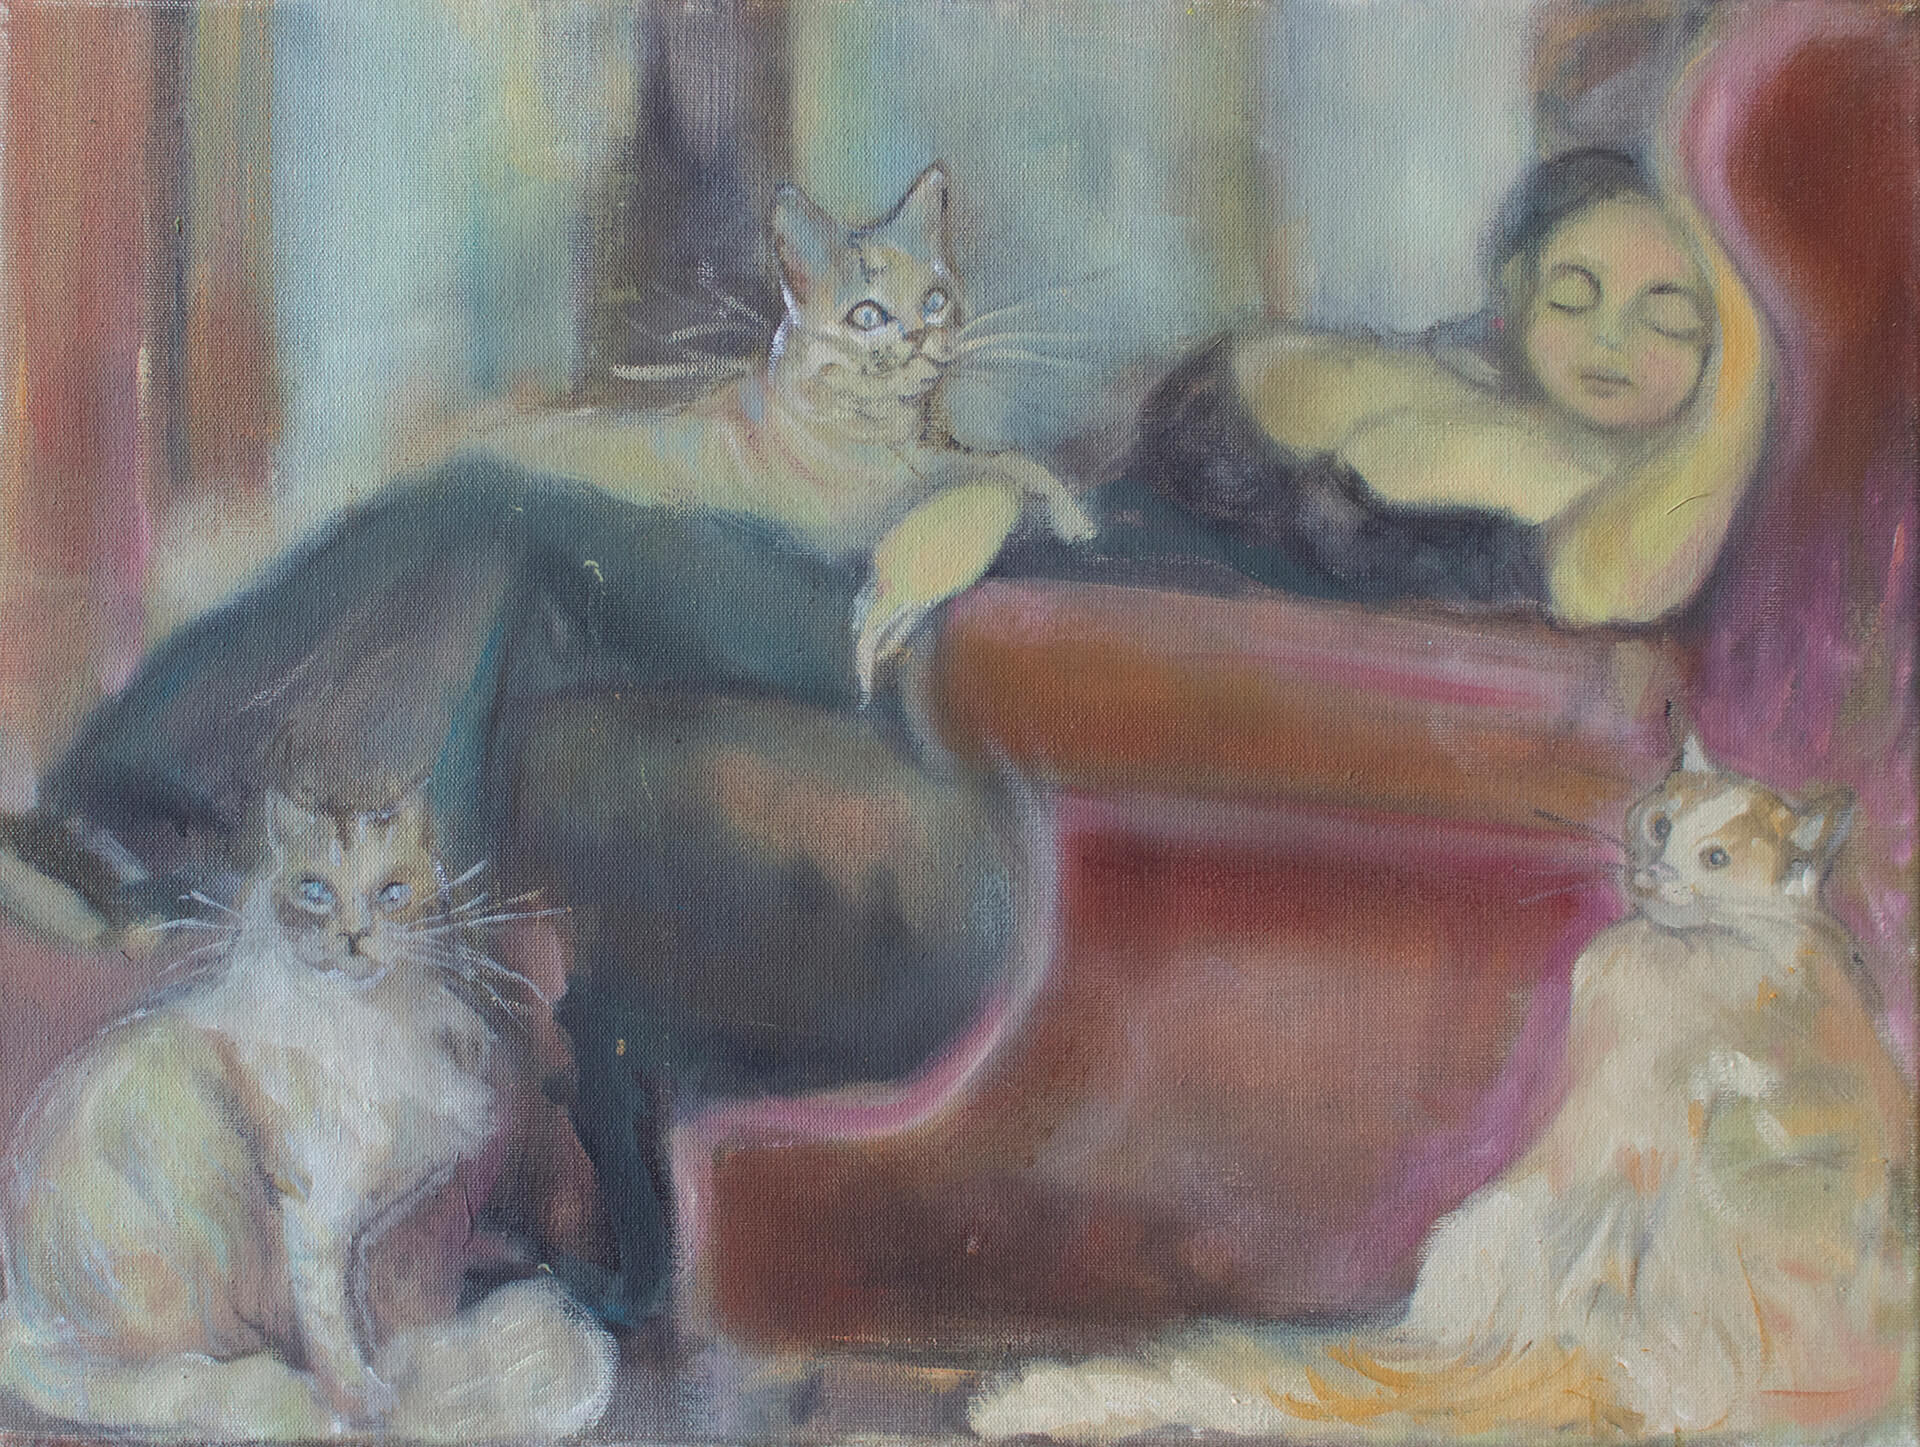 Sleeping Lady with cats. 30x40 cm. Oil on canvas. Sold